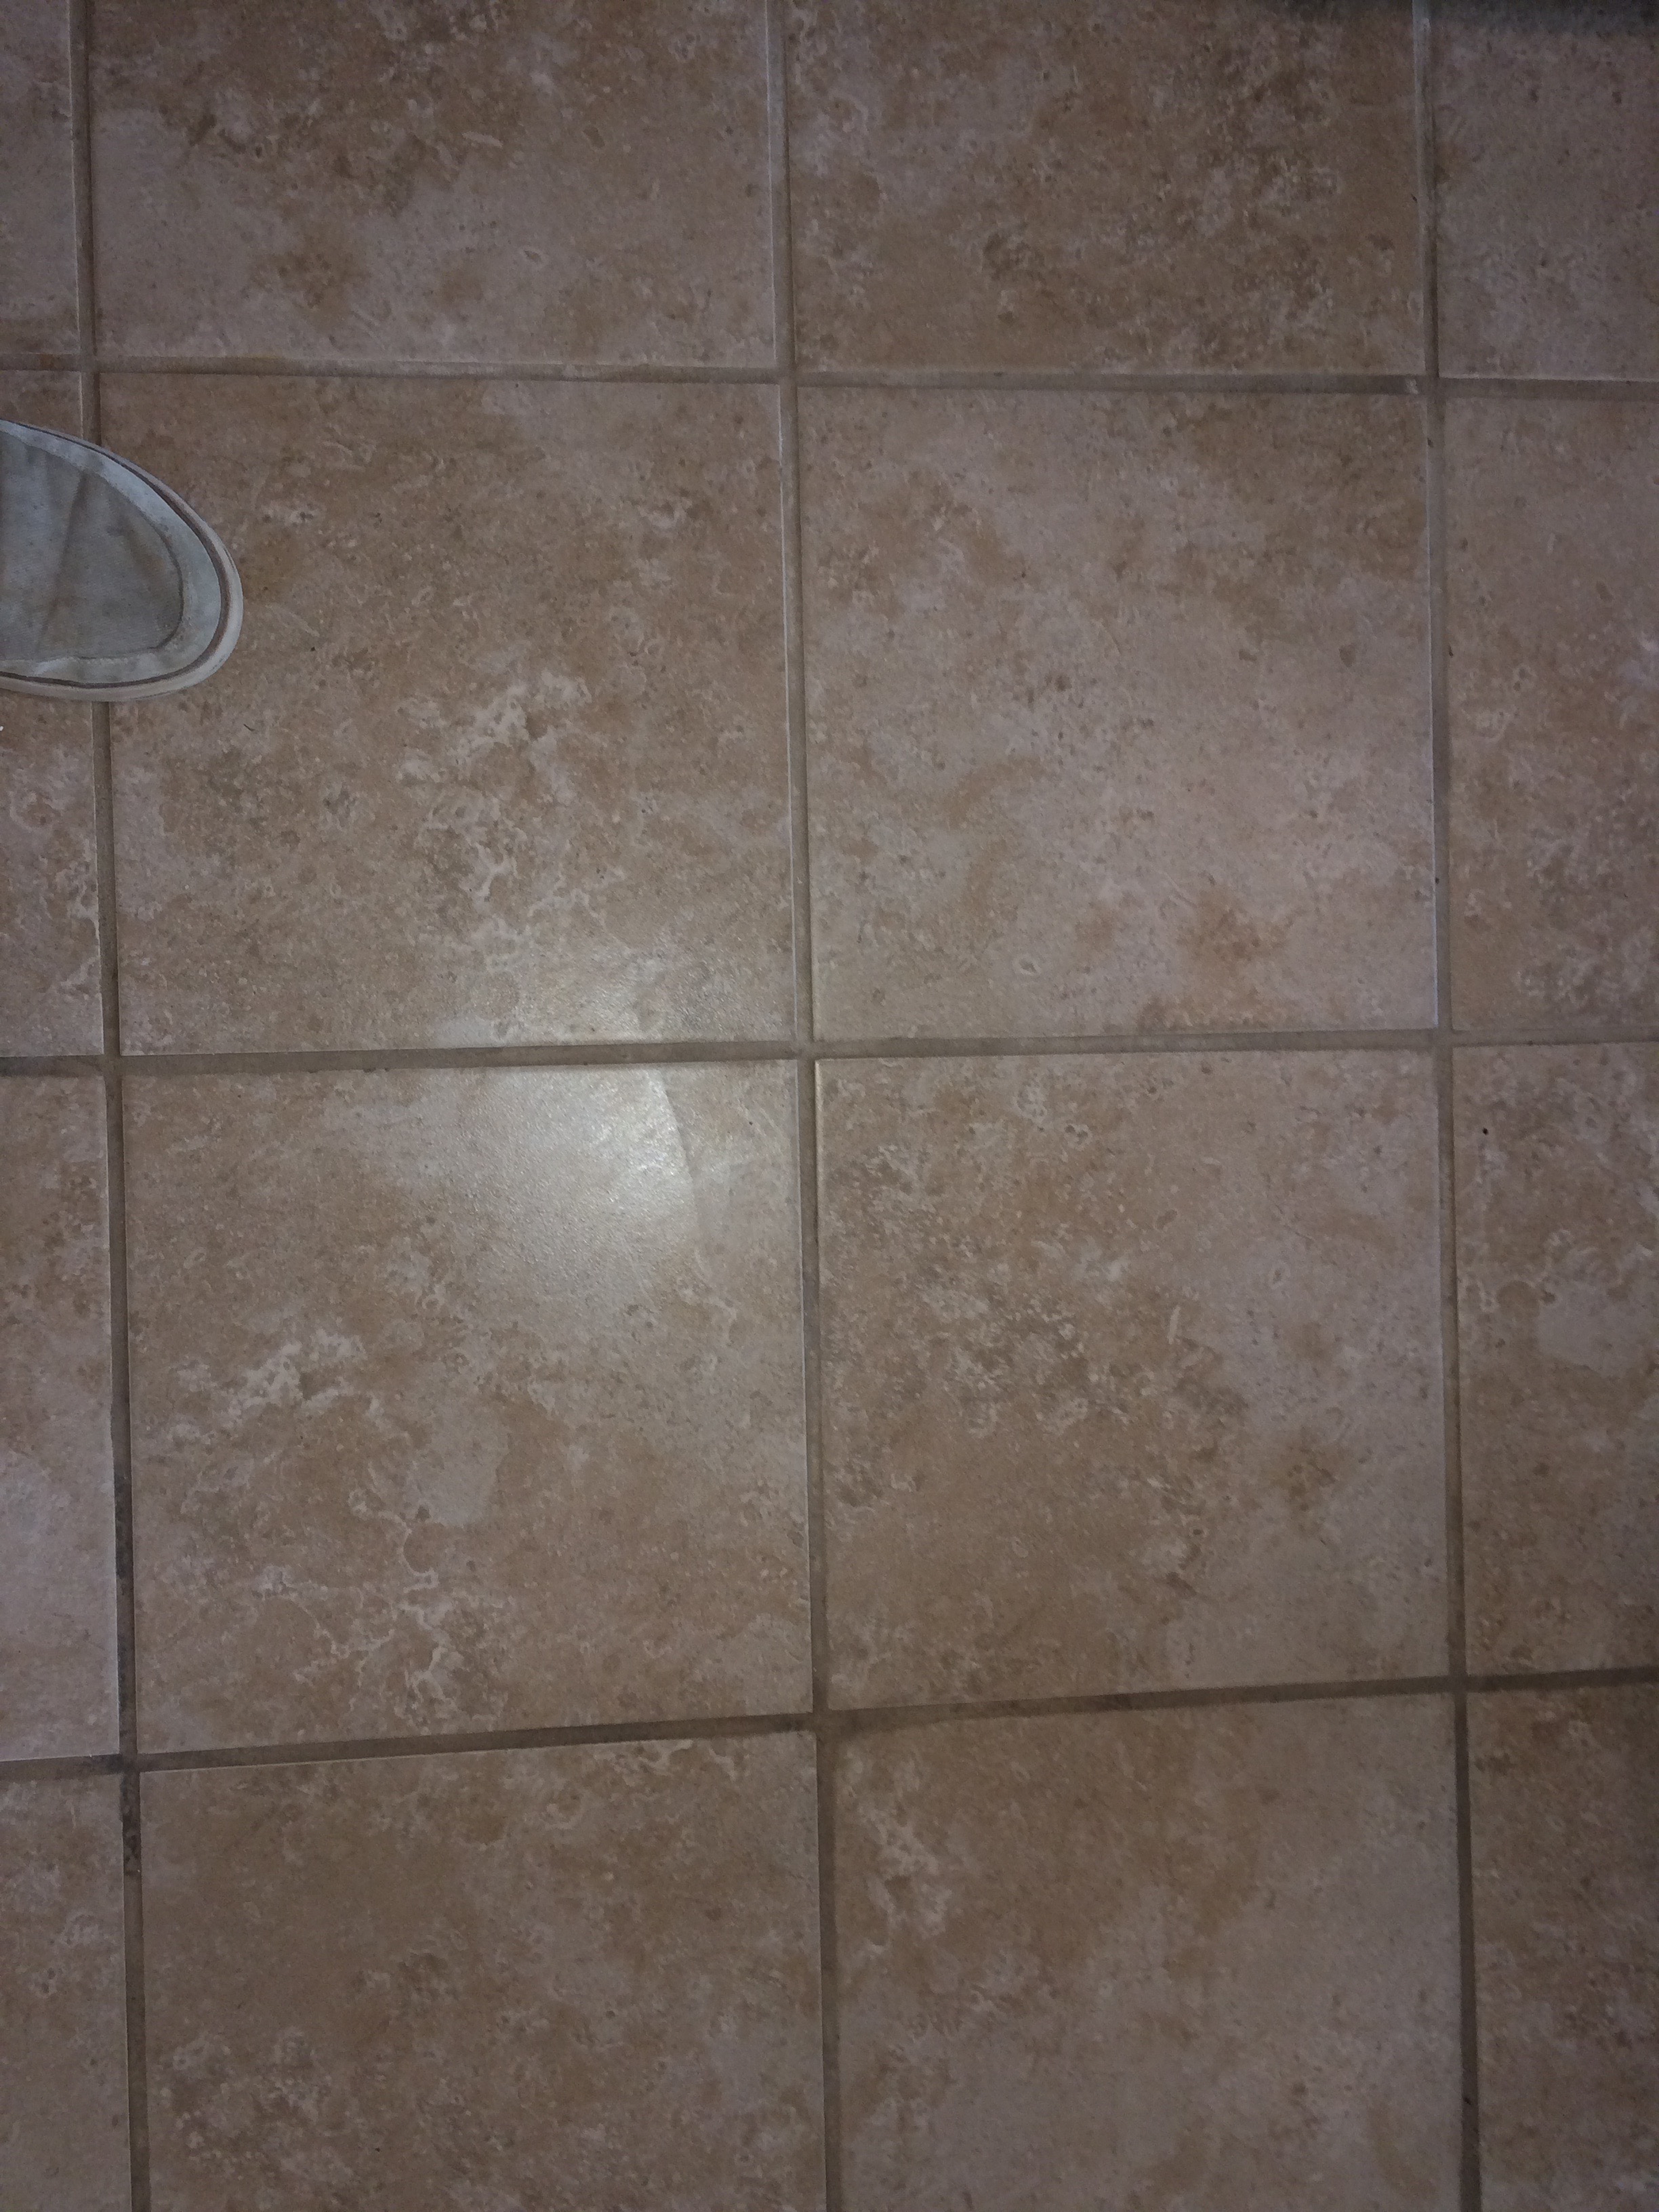 Another Cleaned rust stained tile floor